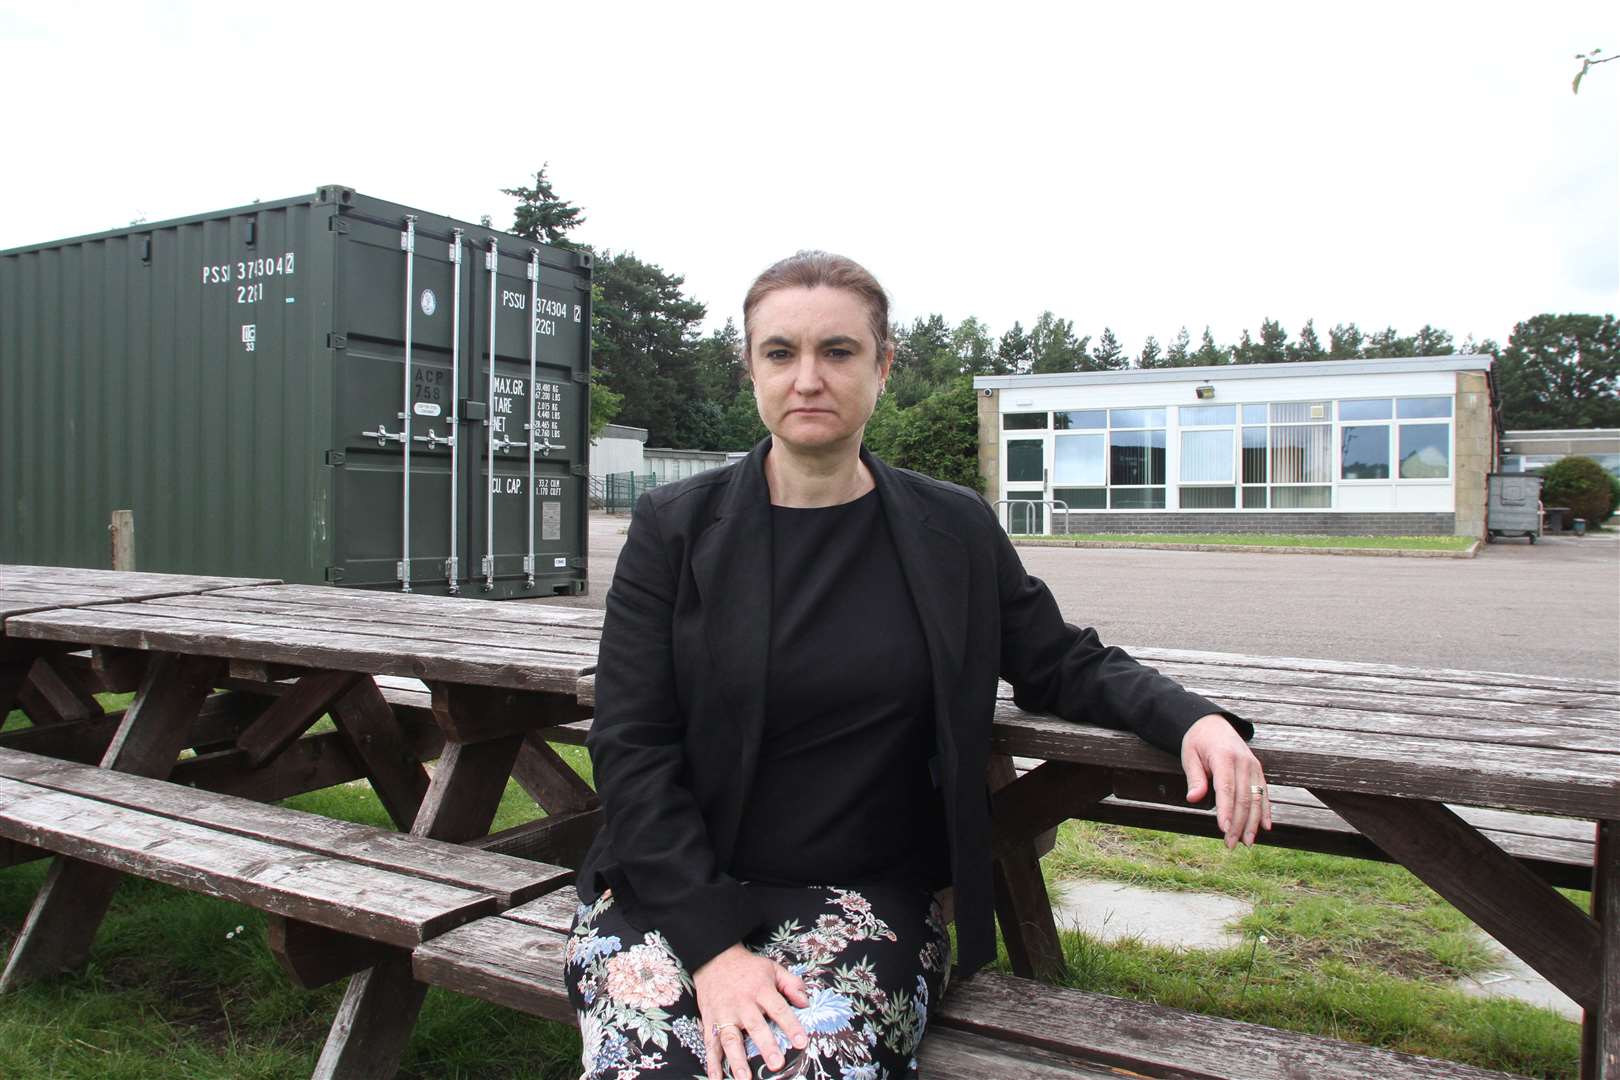 Claire McGonigal, Grantown Grammar headteacher, has said any damage to school property will be reported to police.